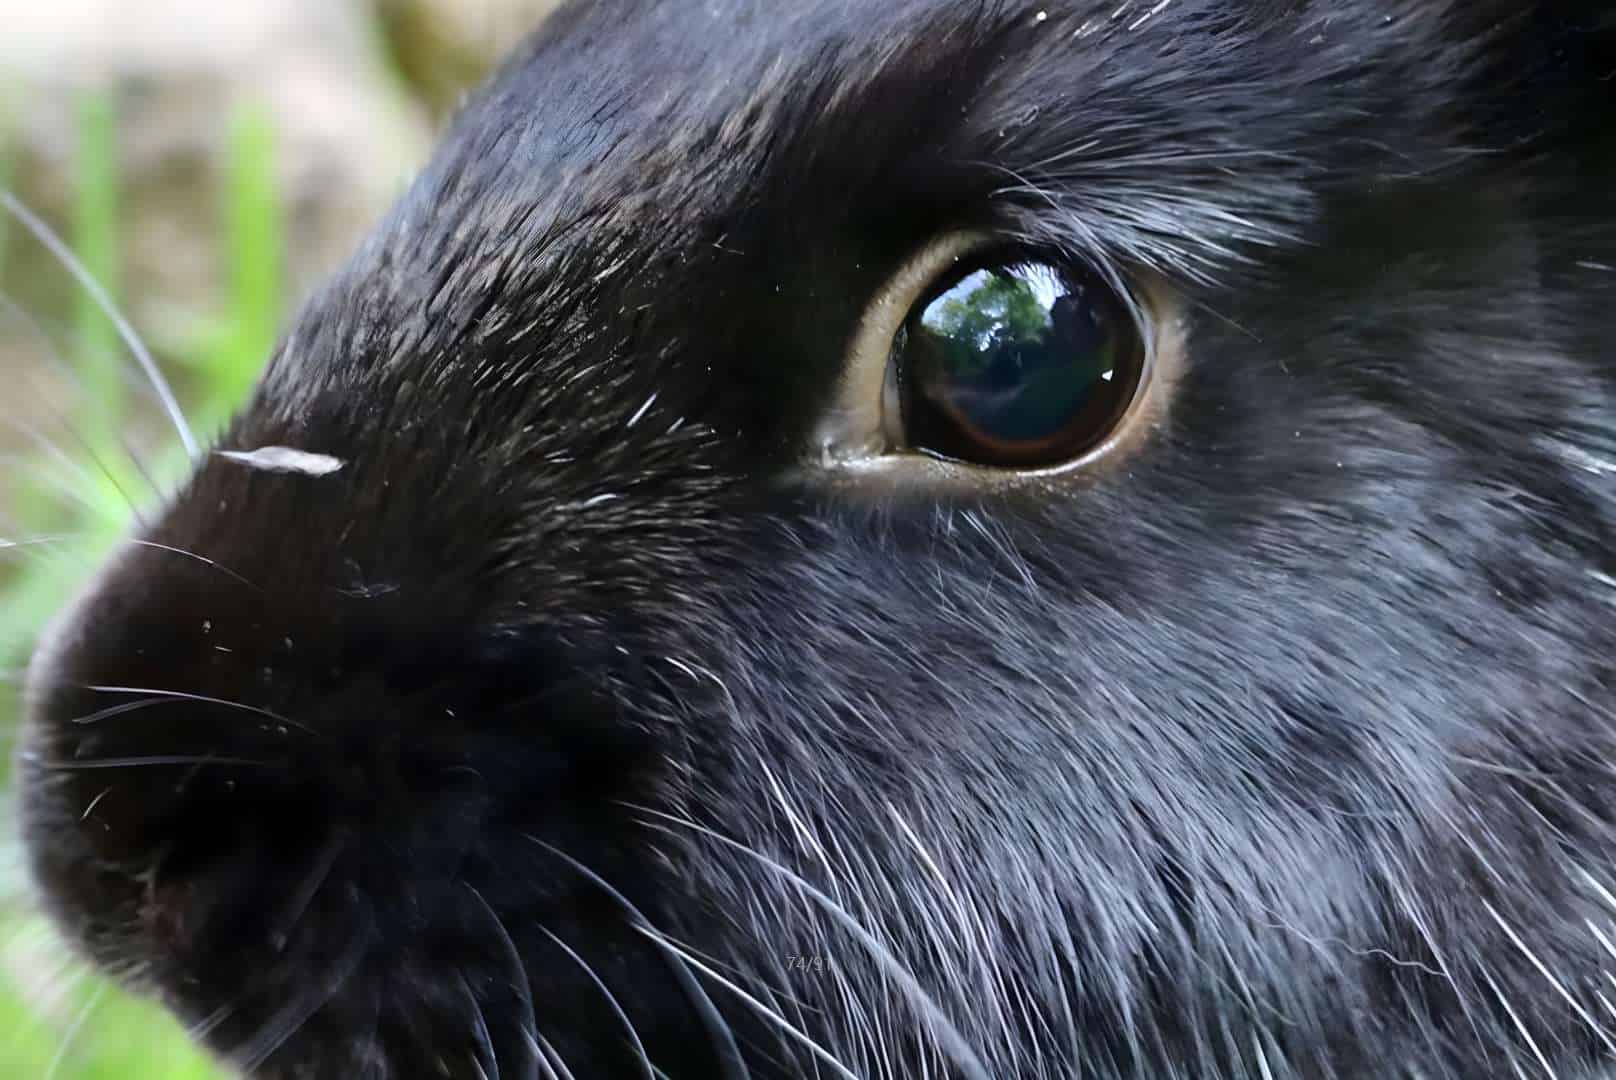 All about Rabbit’s Eyes